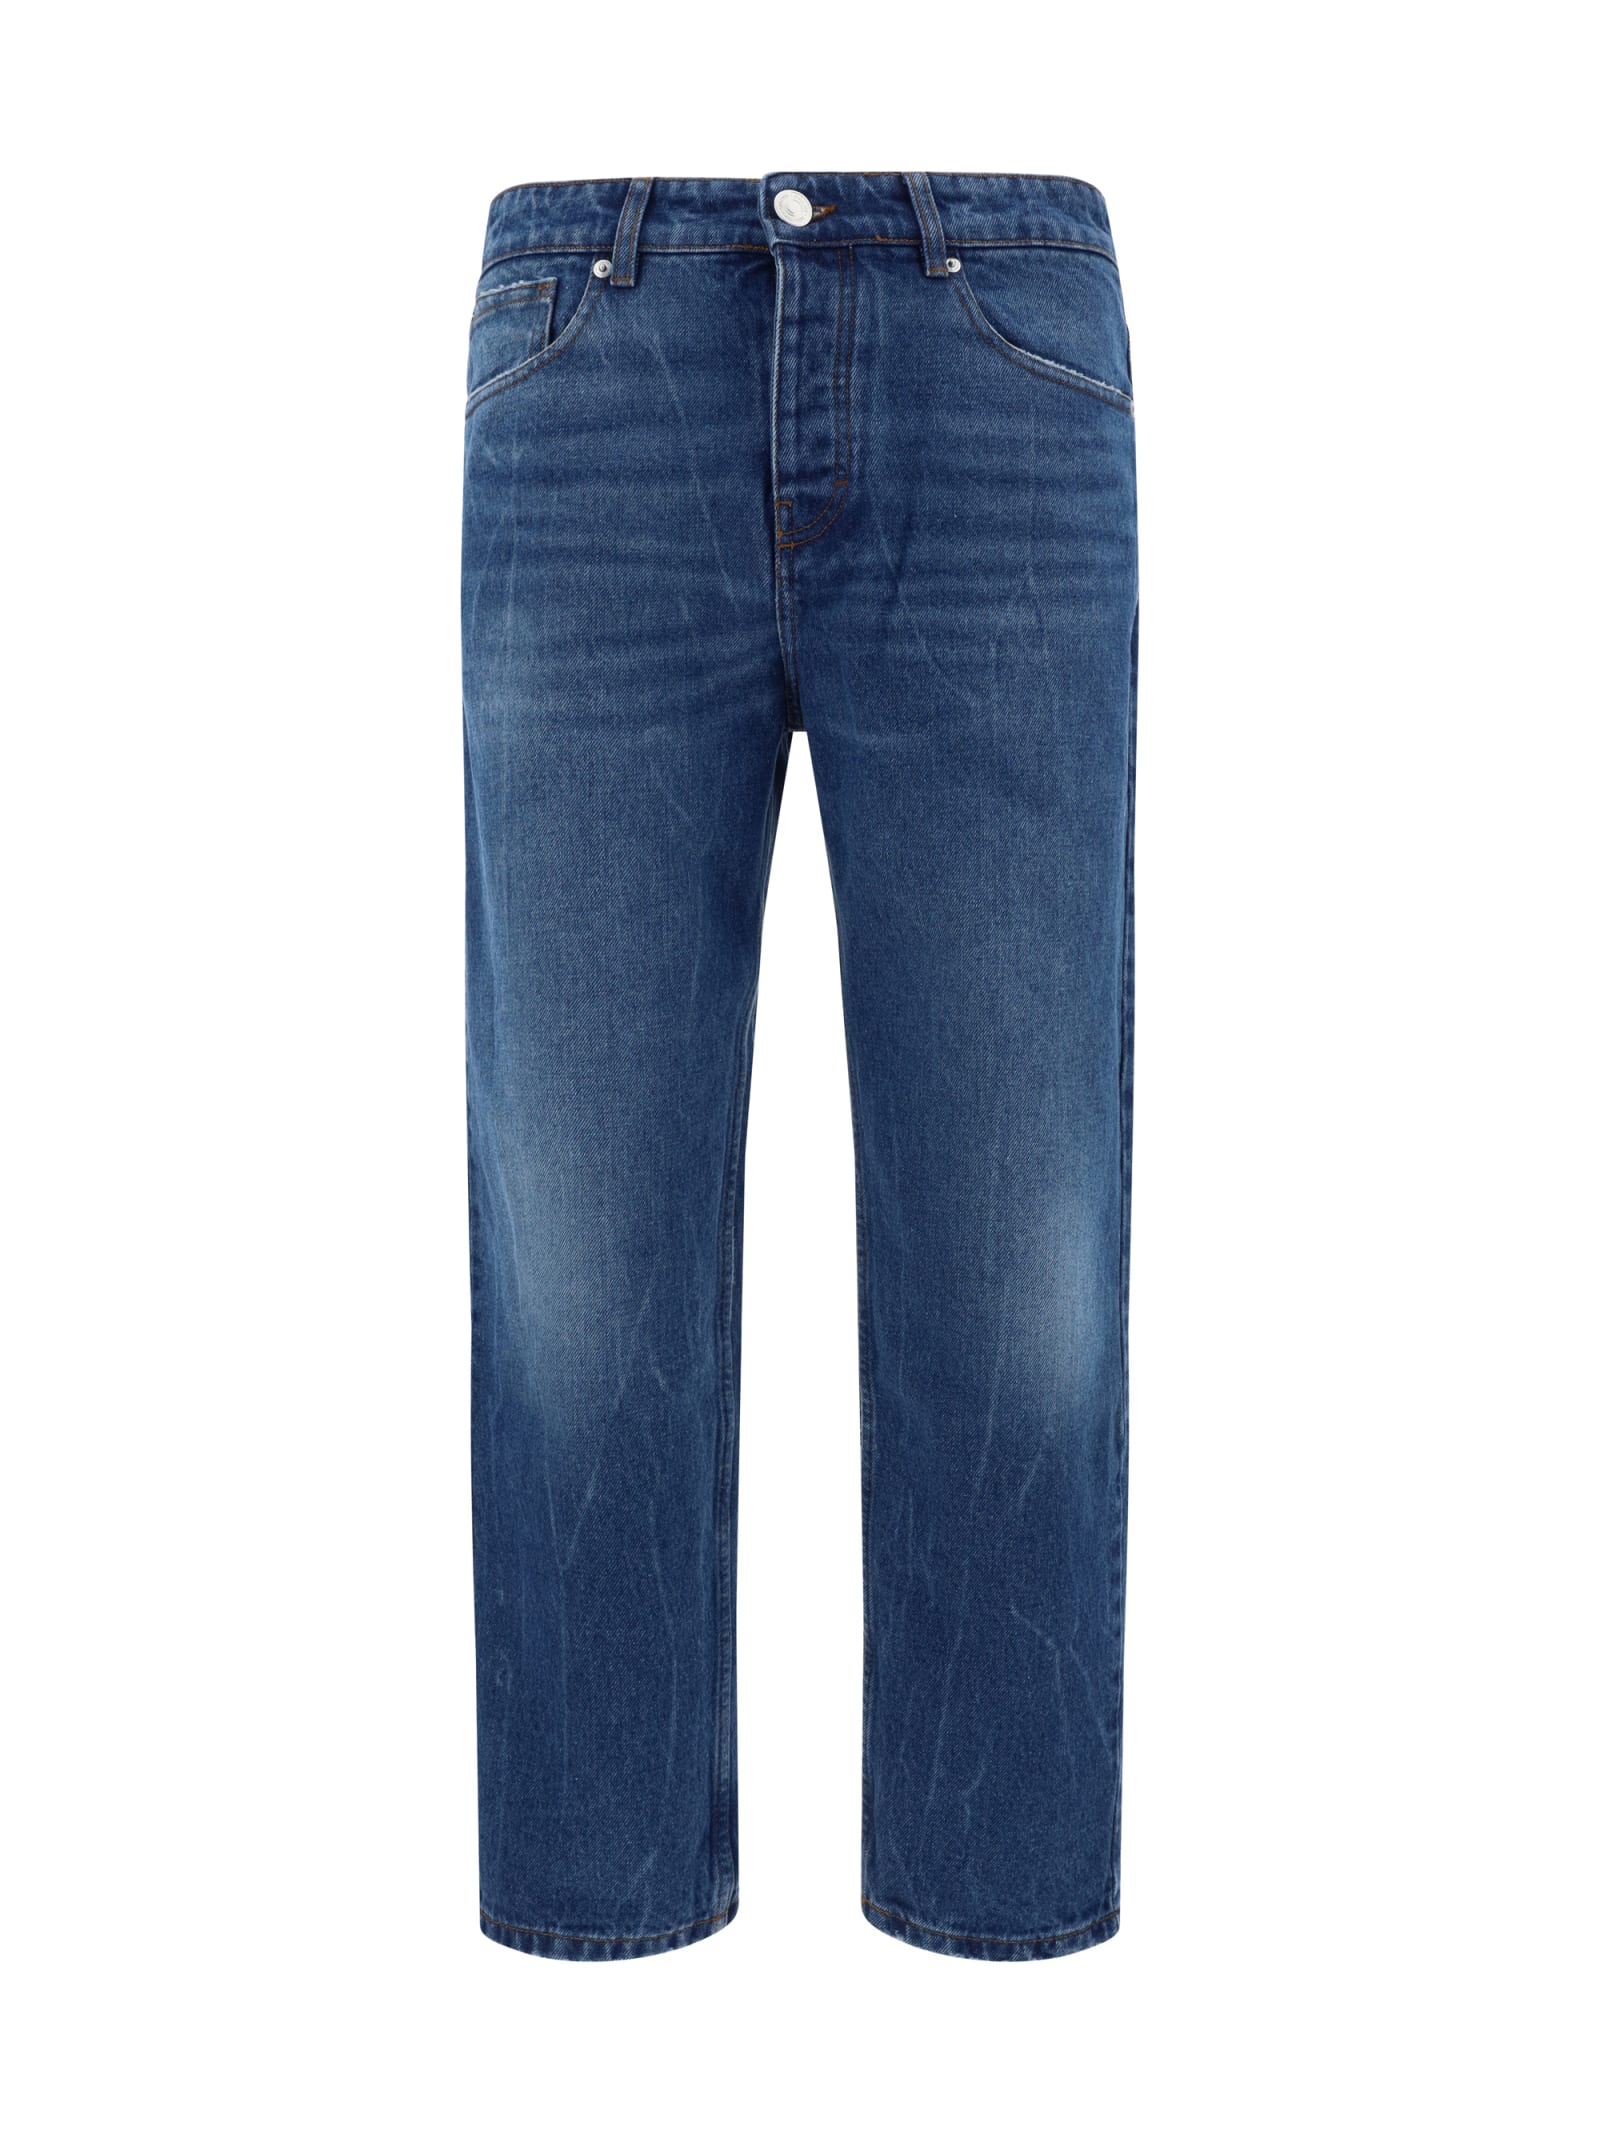 Shop Ami Alexandre Mattiussi Tapered Jeans Jeans In Used Blue